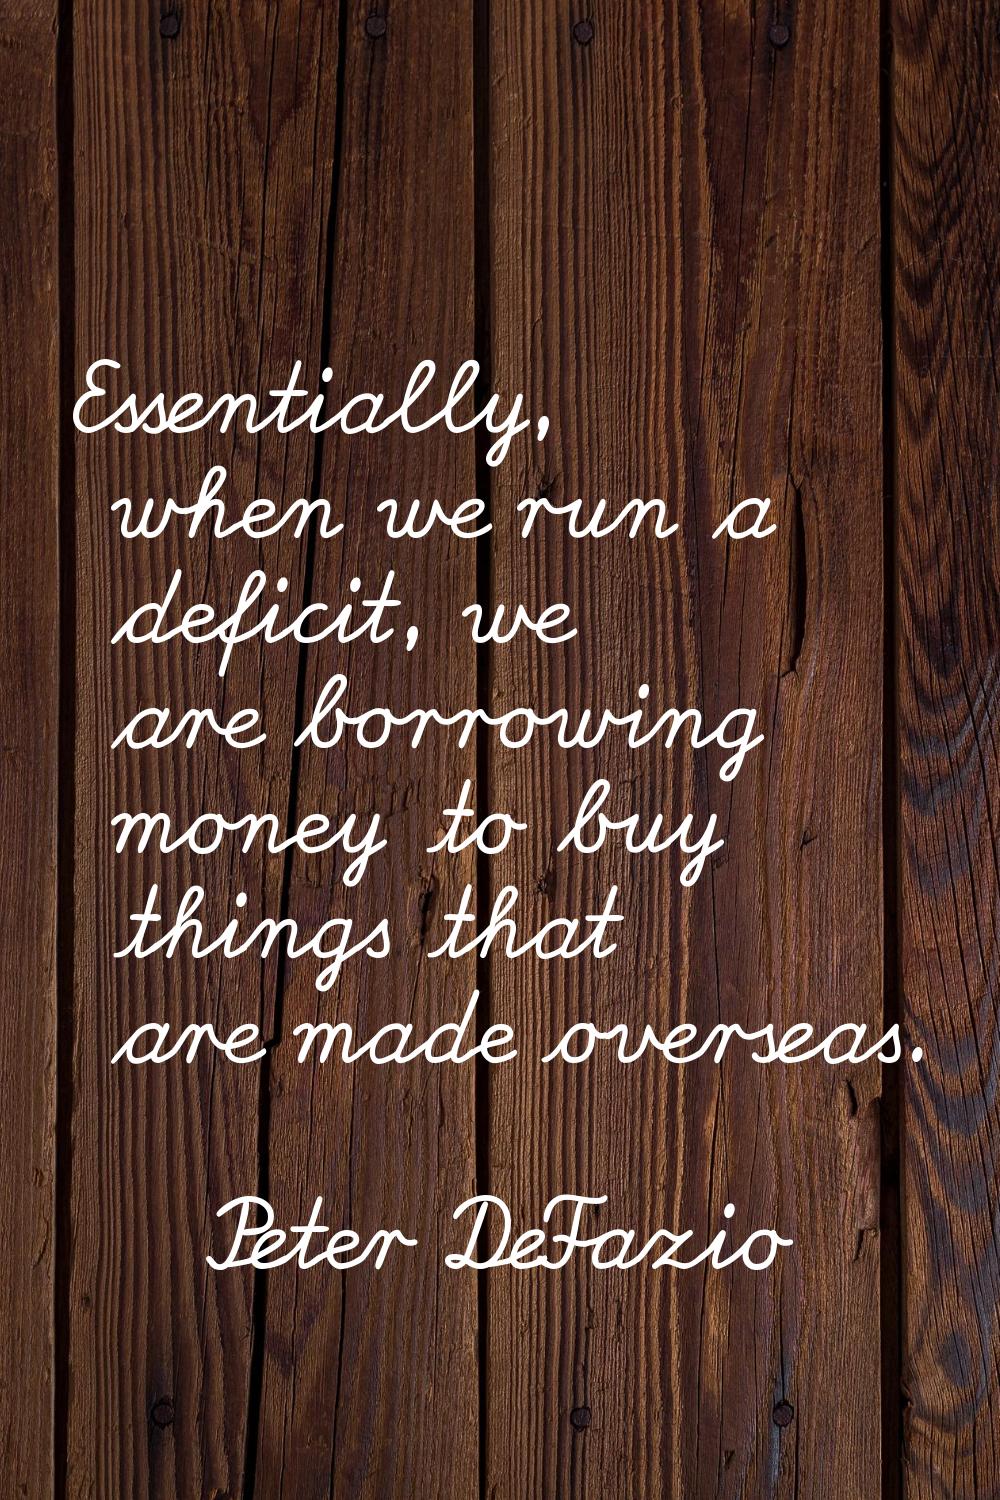 Essentially, when we run a deficit, we are borrowing money to buy things that are made overseas.